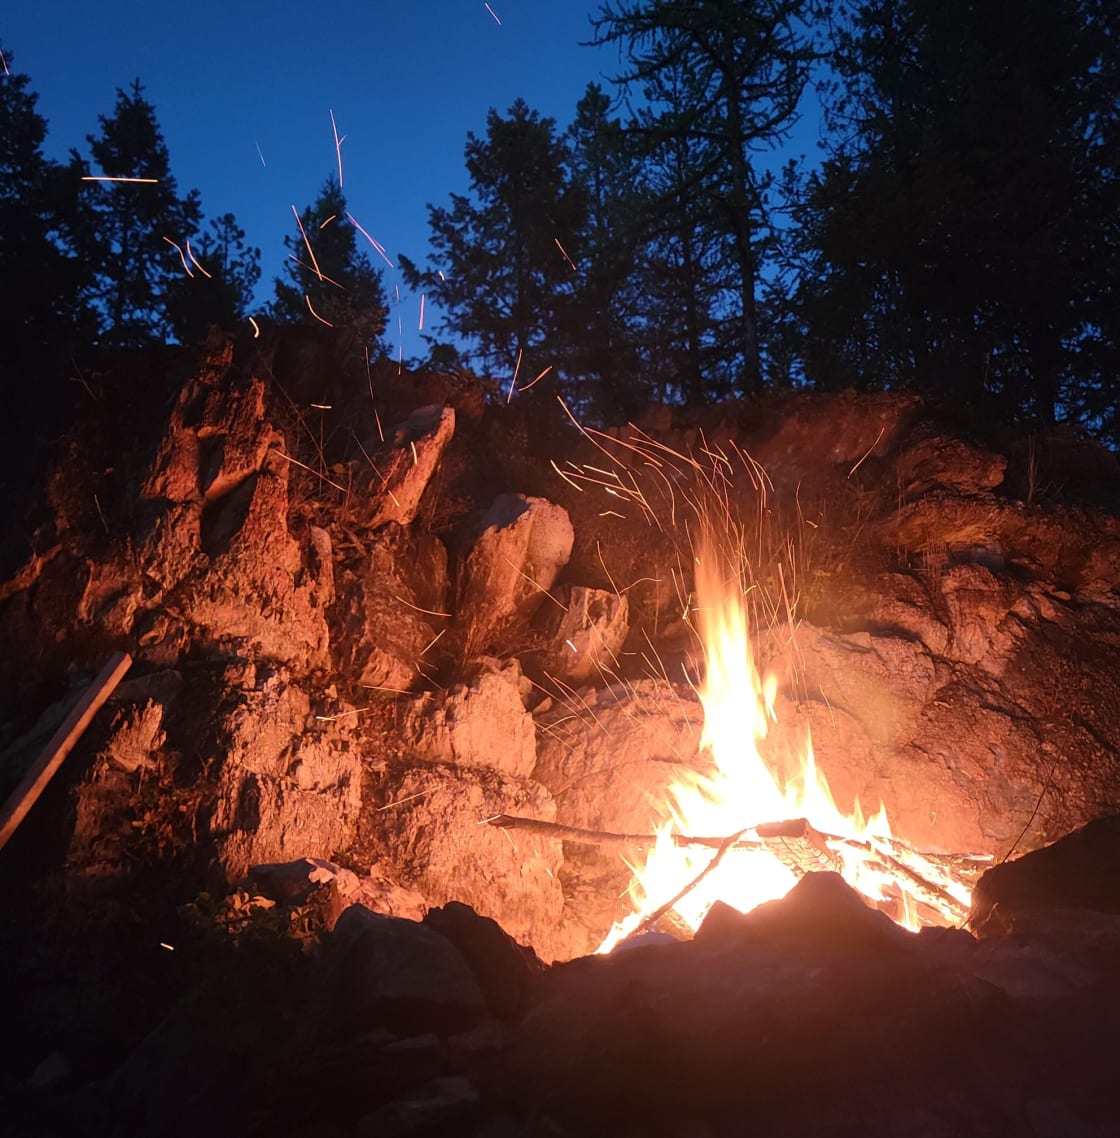 View of the fire pit at night with the natural rock wall behind it.